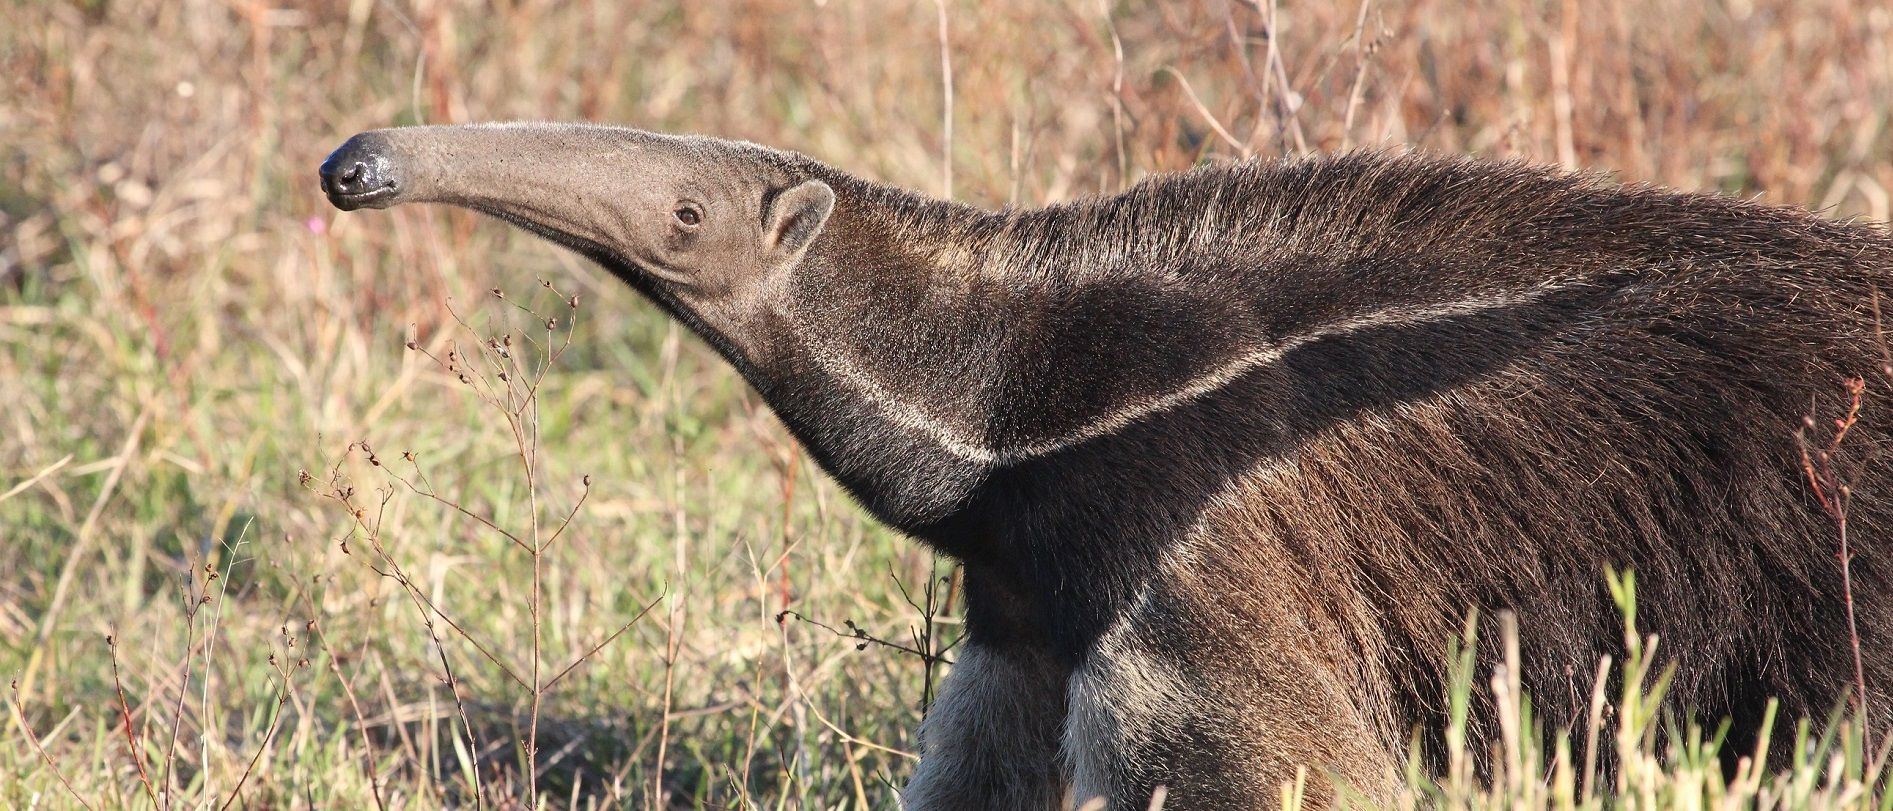 giant anteater superstitions myths brazil